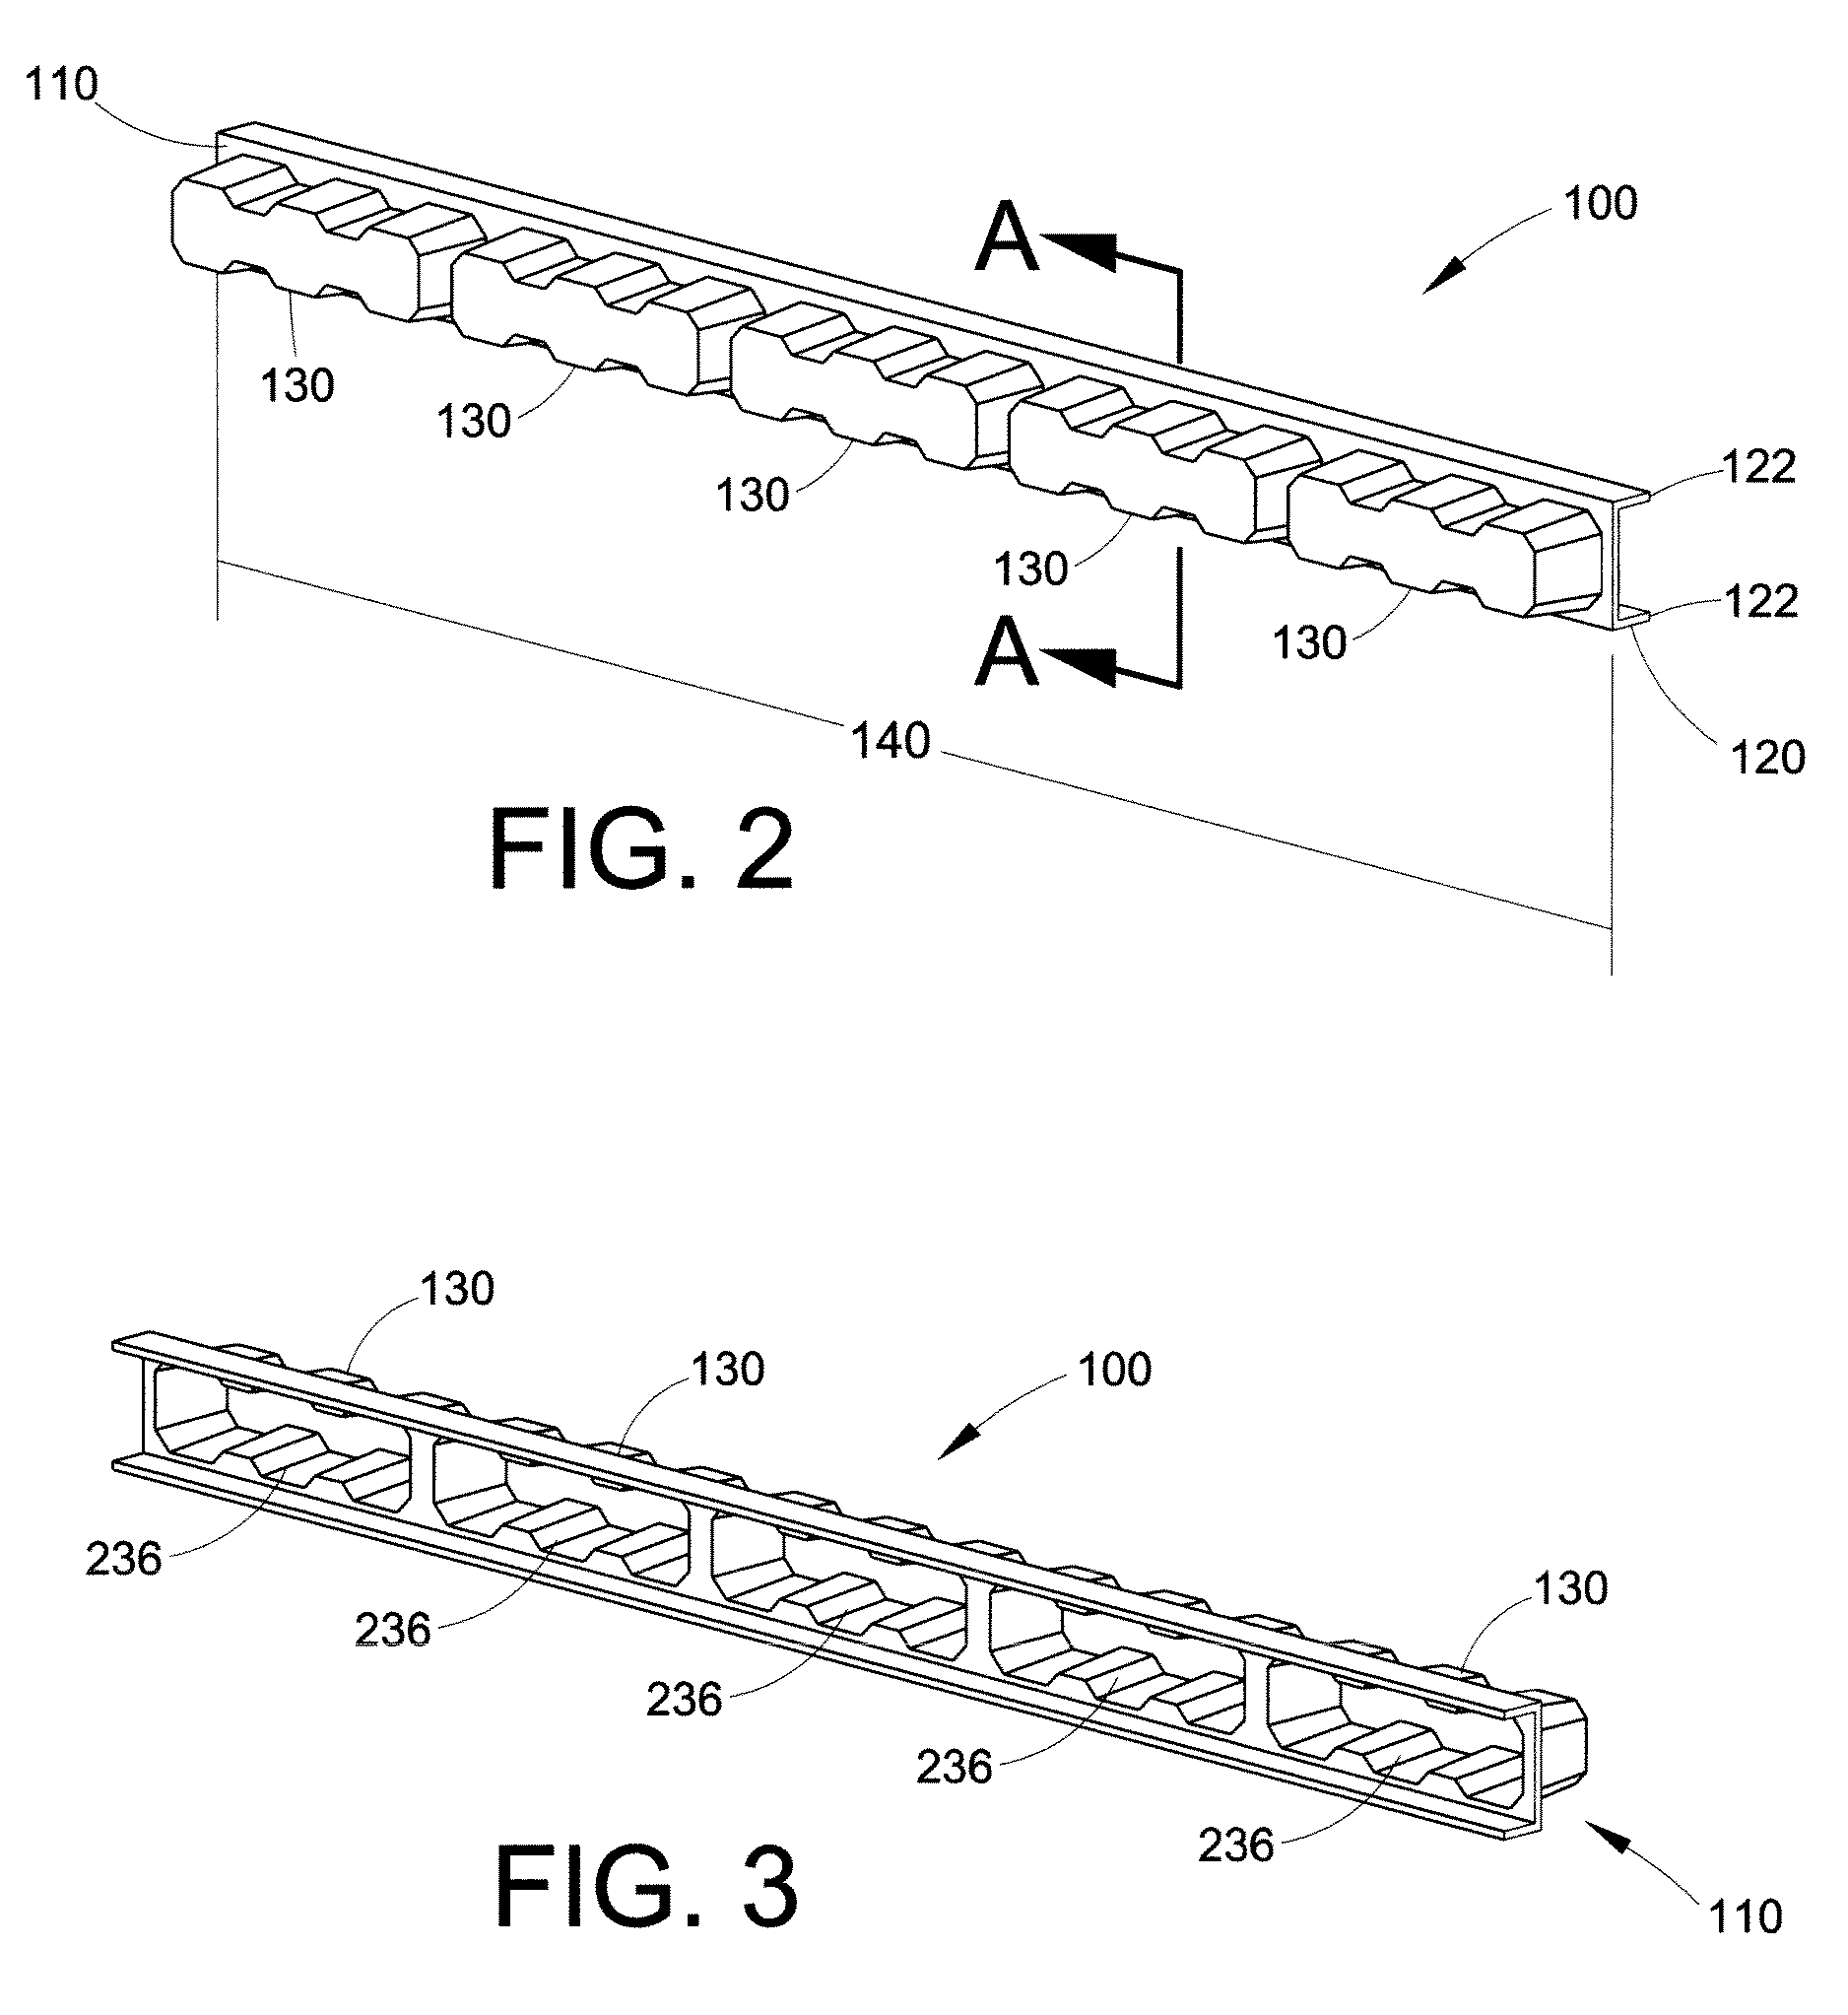 Vehicle bumper system with energy absorber